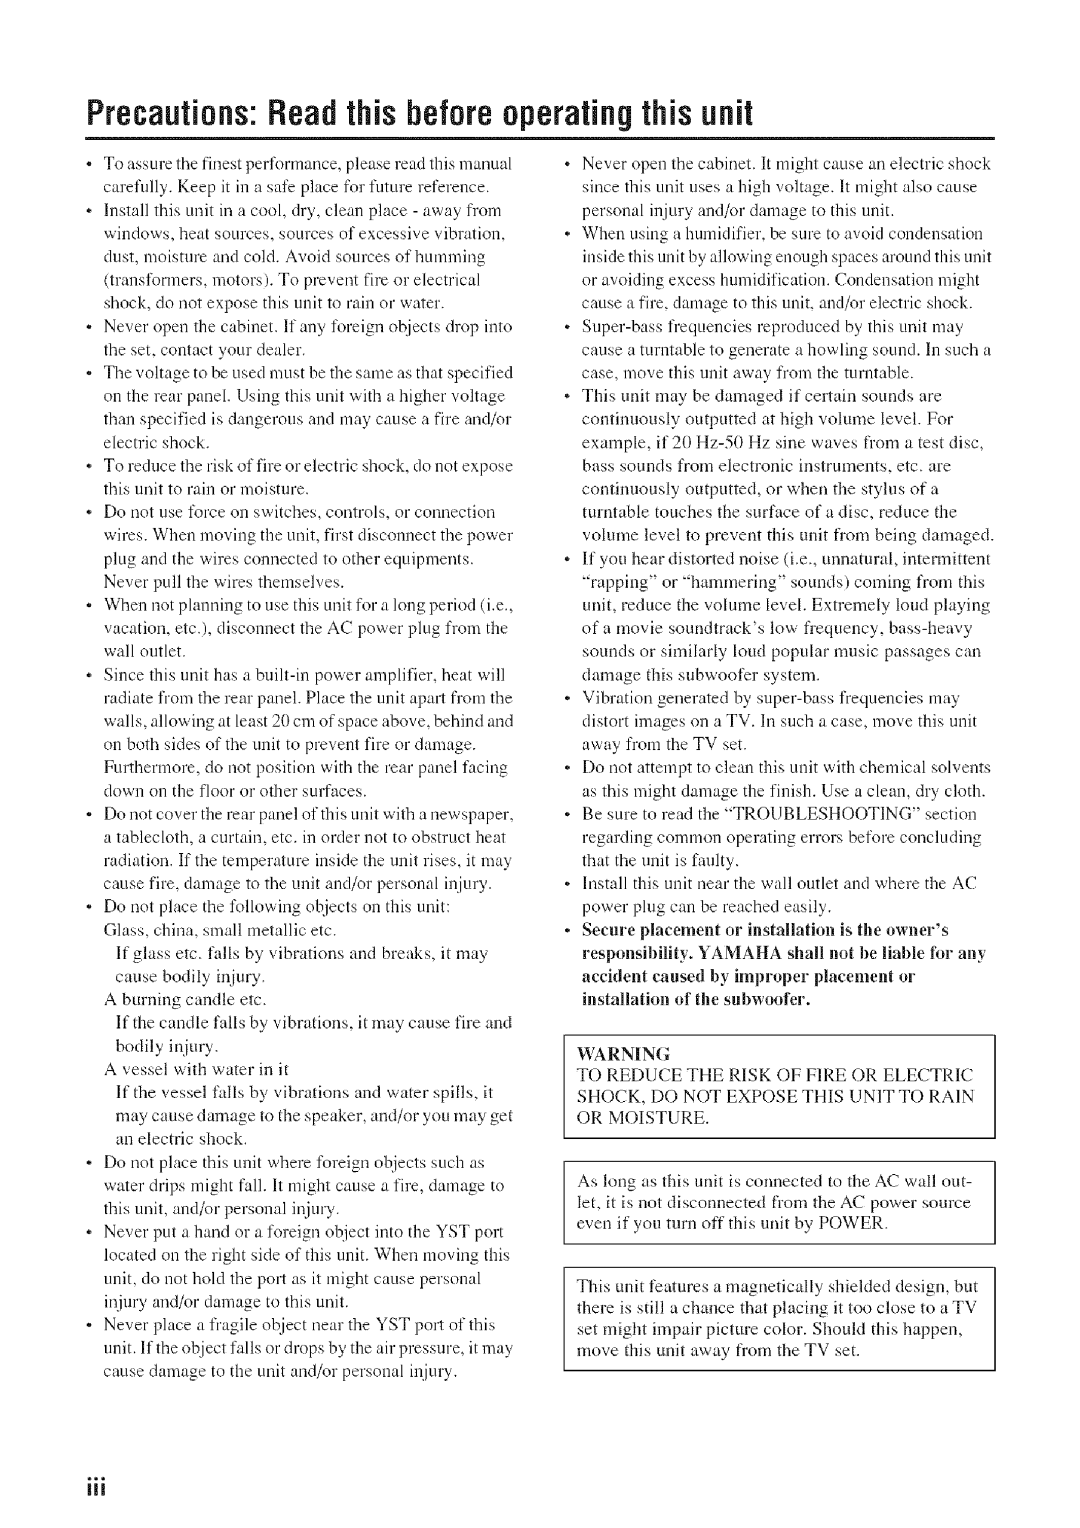 Yamaha SW012 manual Precautions Readthis before operating this unit 